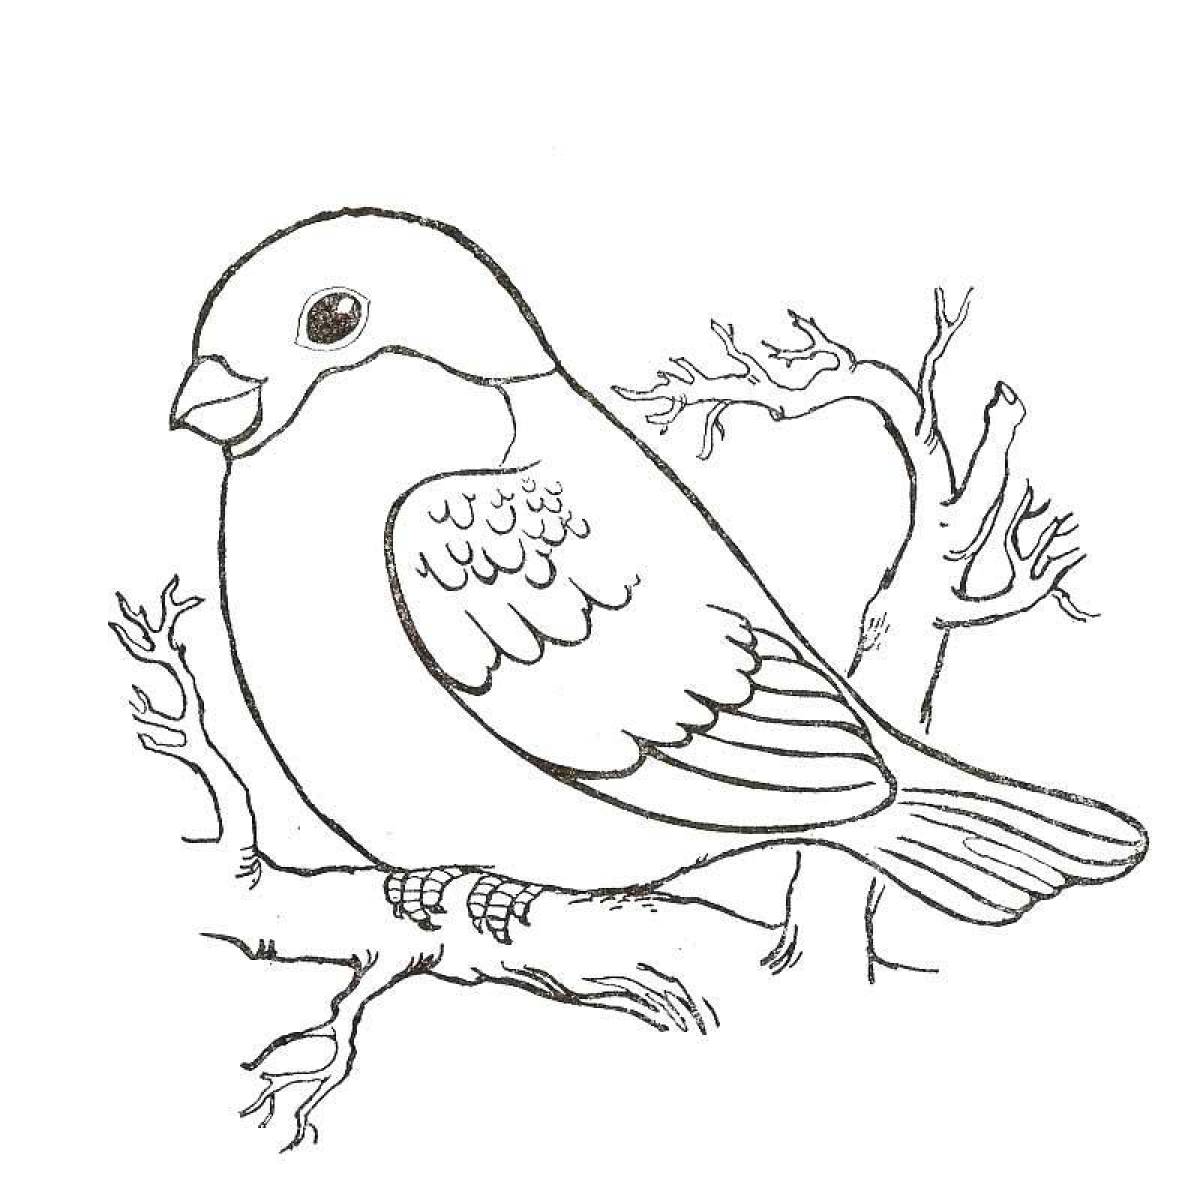 Coloring live wintering birds for children 5-6 years old